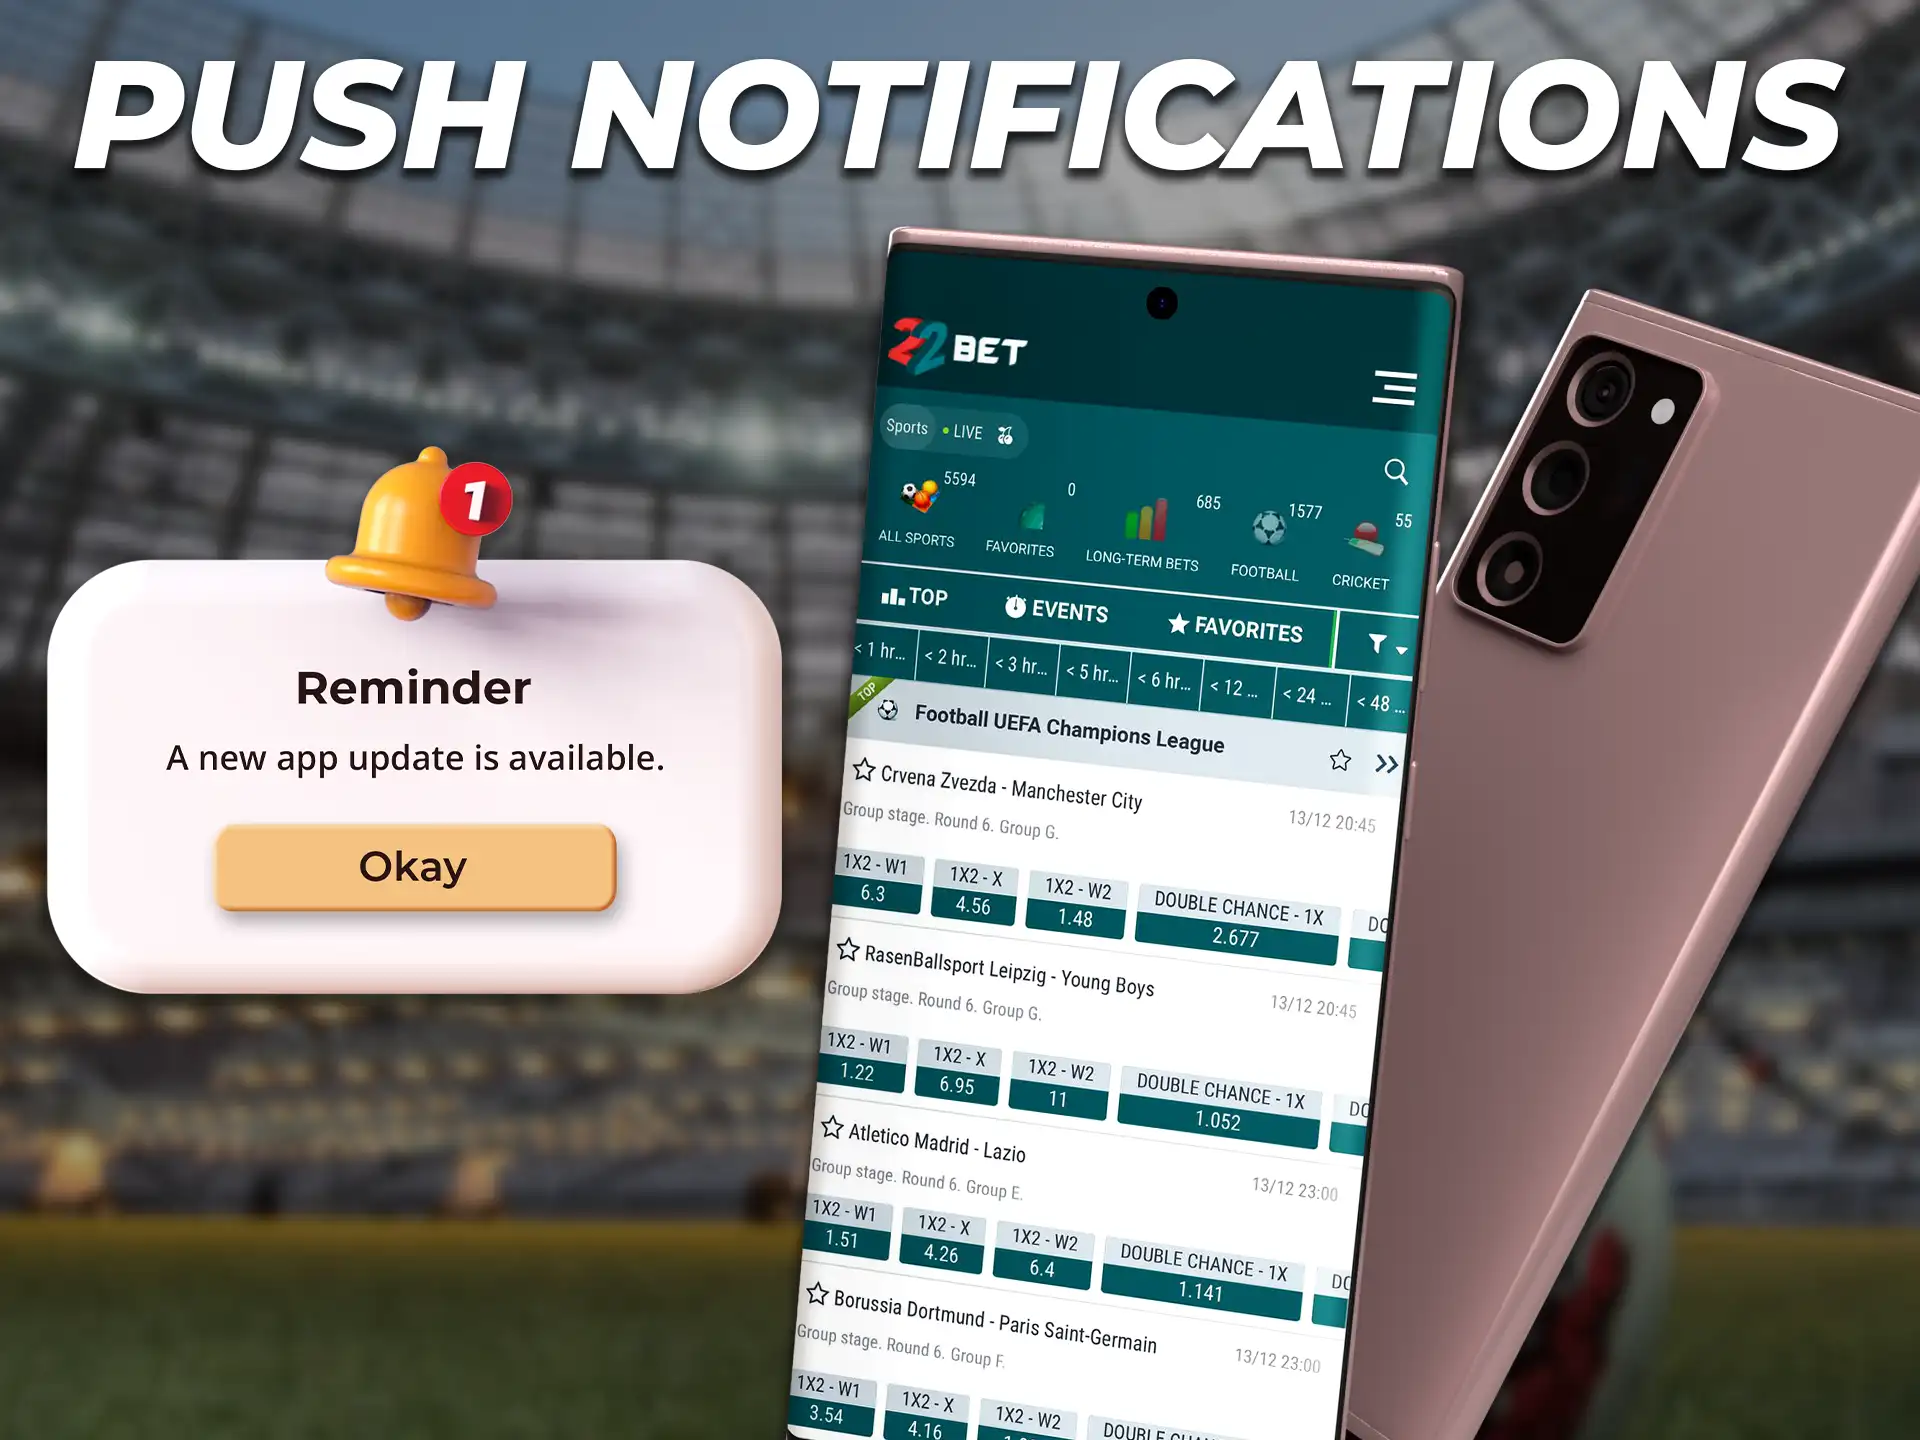 You will receive instant notifications of any changes to the site on the 22Bet app.